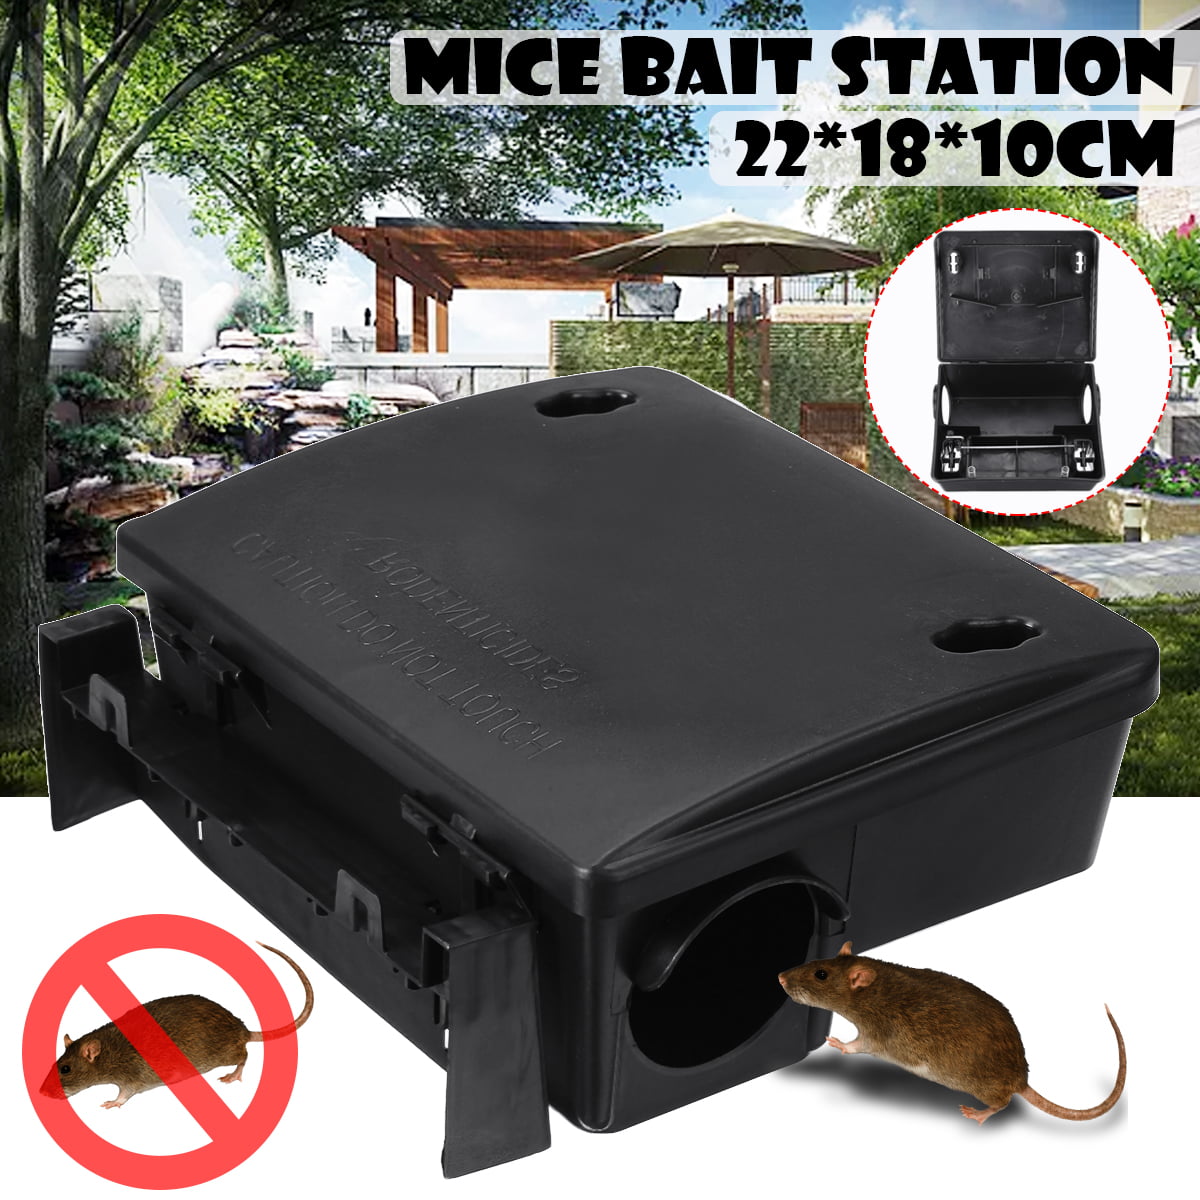 GEE TAC RODENT MOUSE BAIT STATION X 4  BOXES FOR VERMIN POISON 